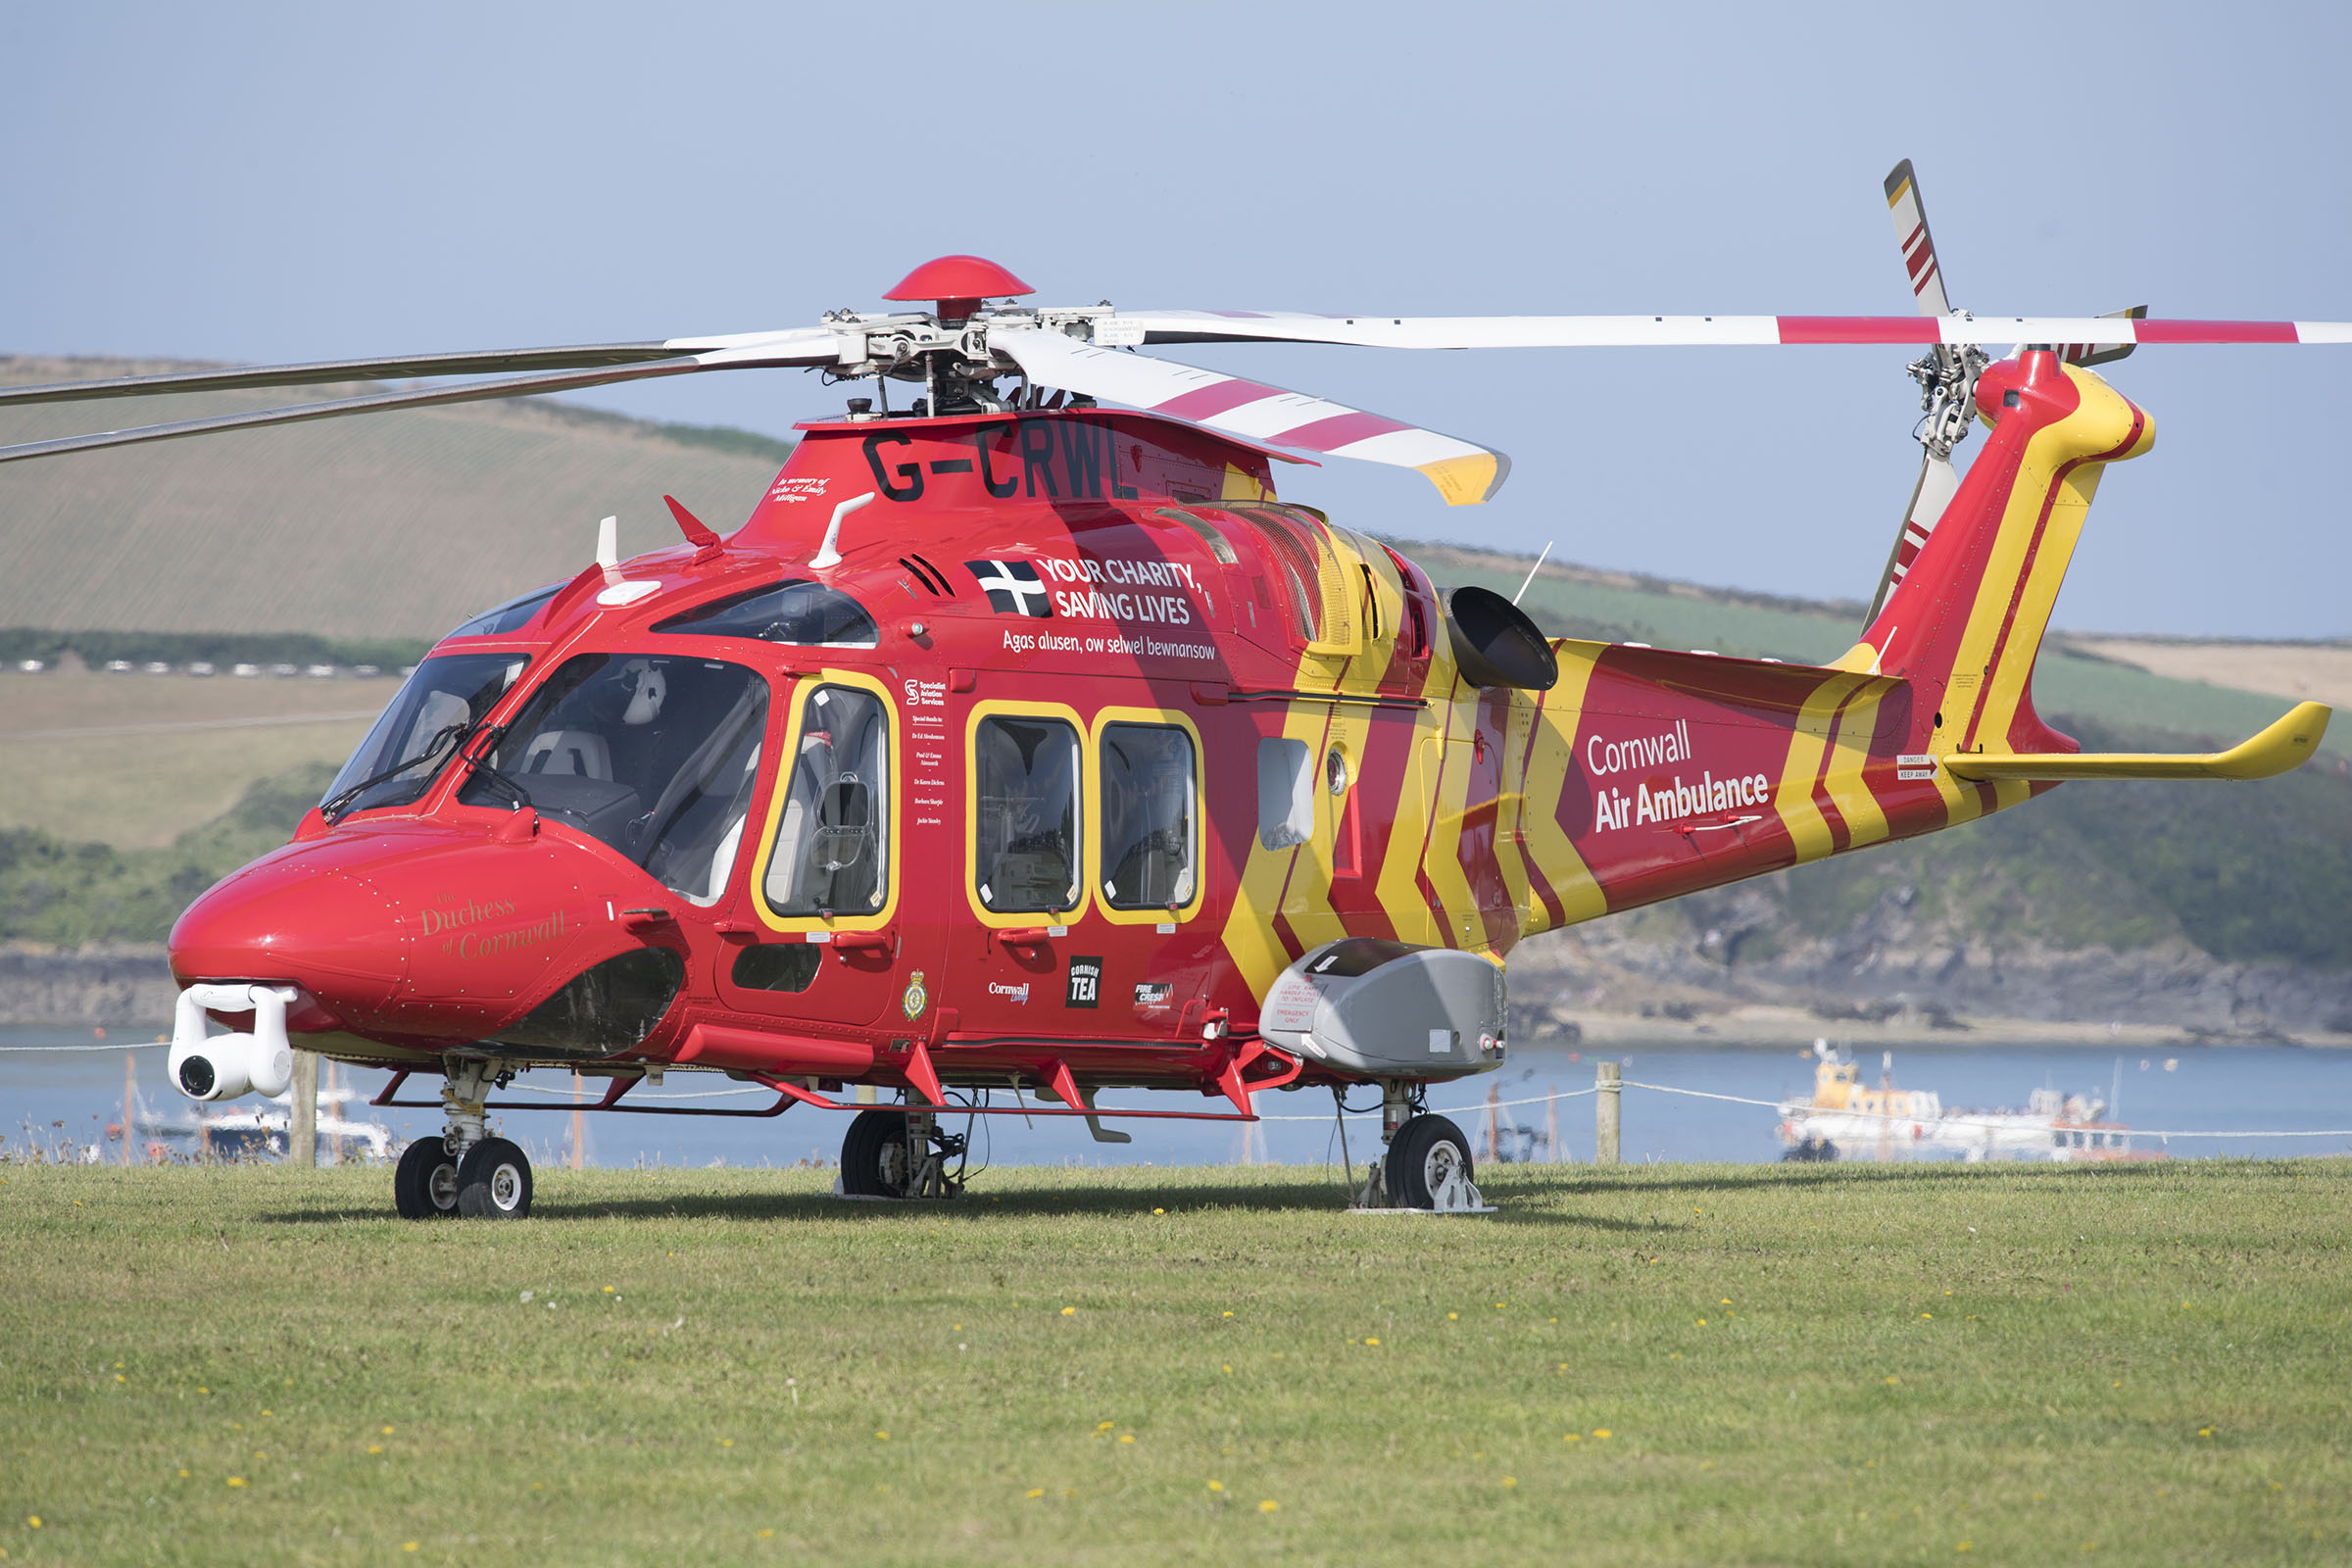 Cornwall Air Ambulance selects Castle Air for operations support